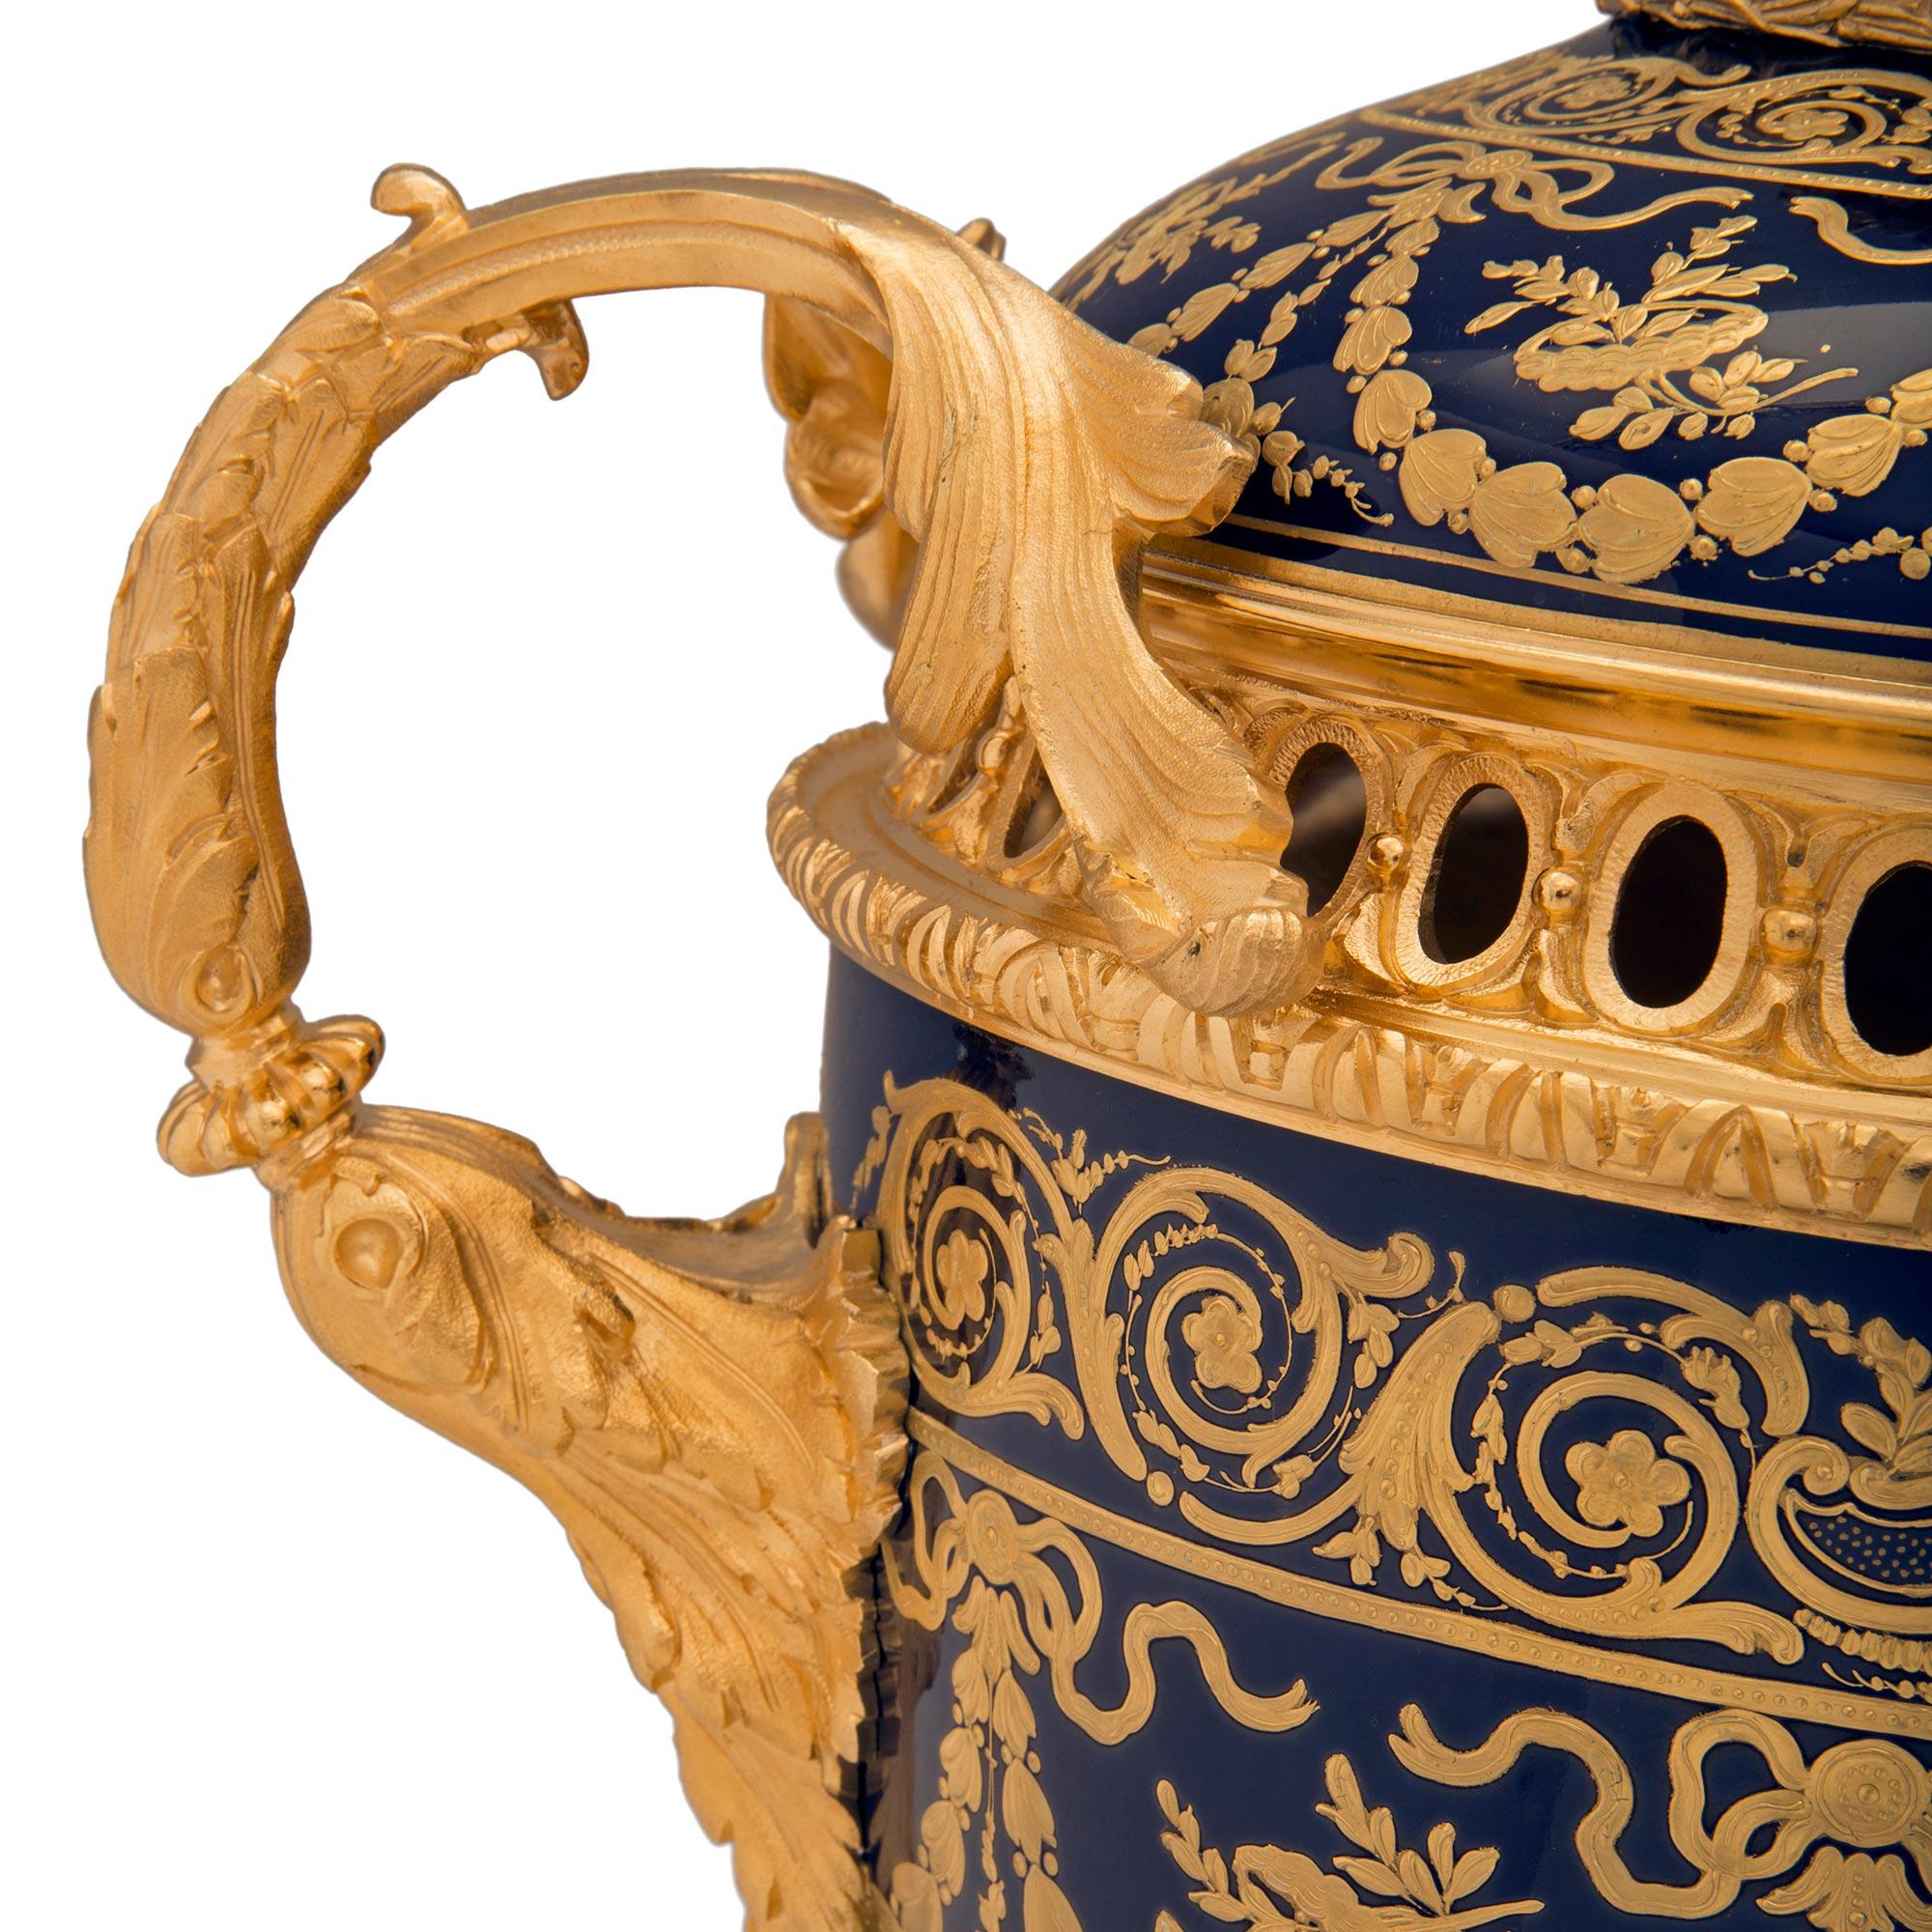 French 19th Century Louis XVI St. Sèvres Porcelain and Ormolu Lidded Urn For Sale 5